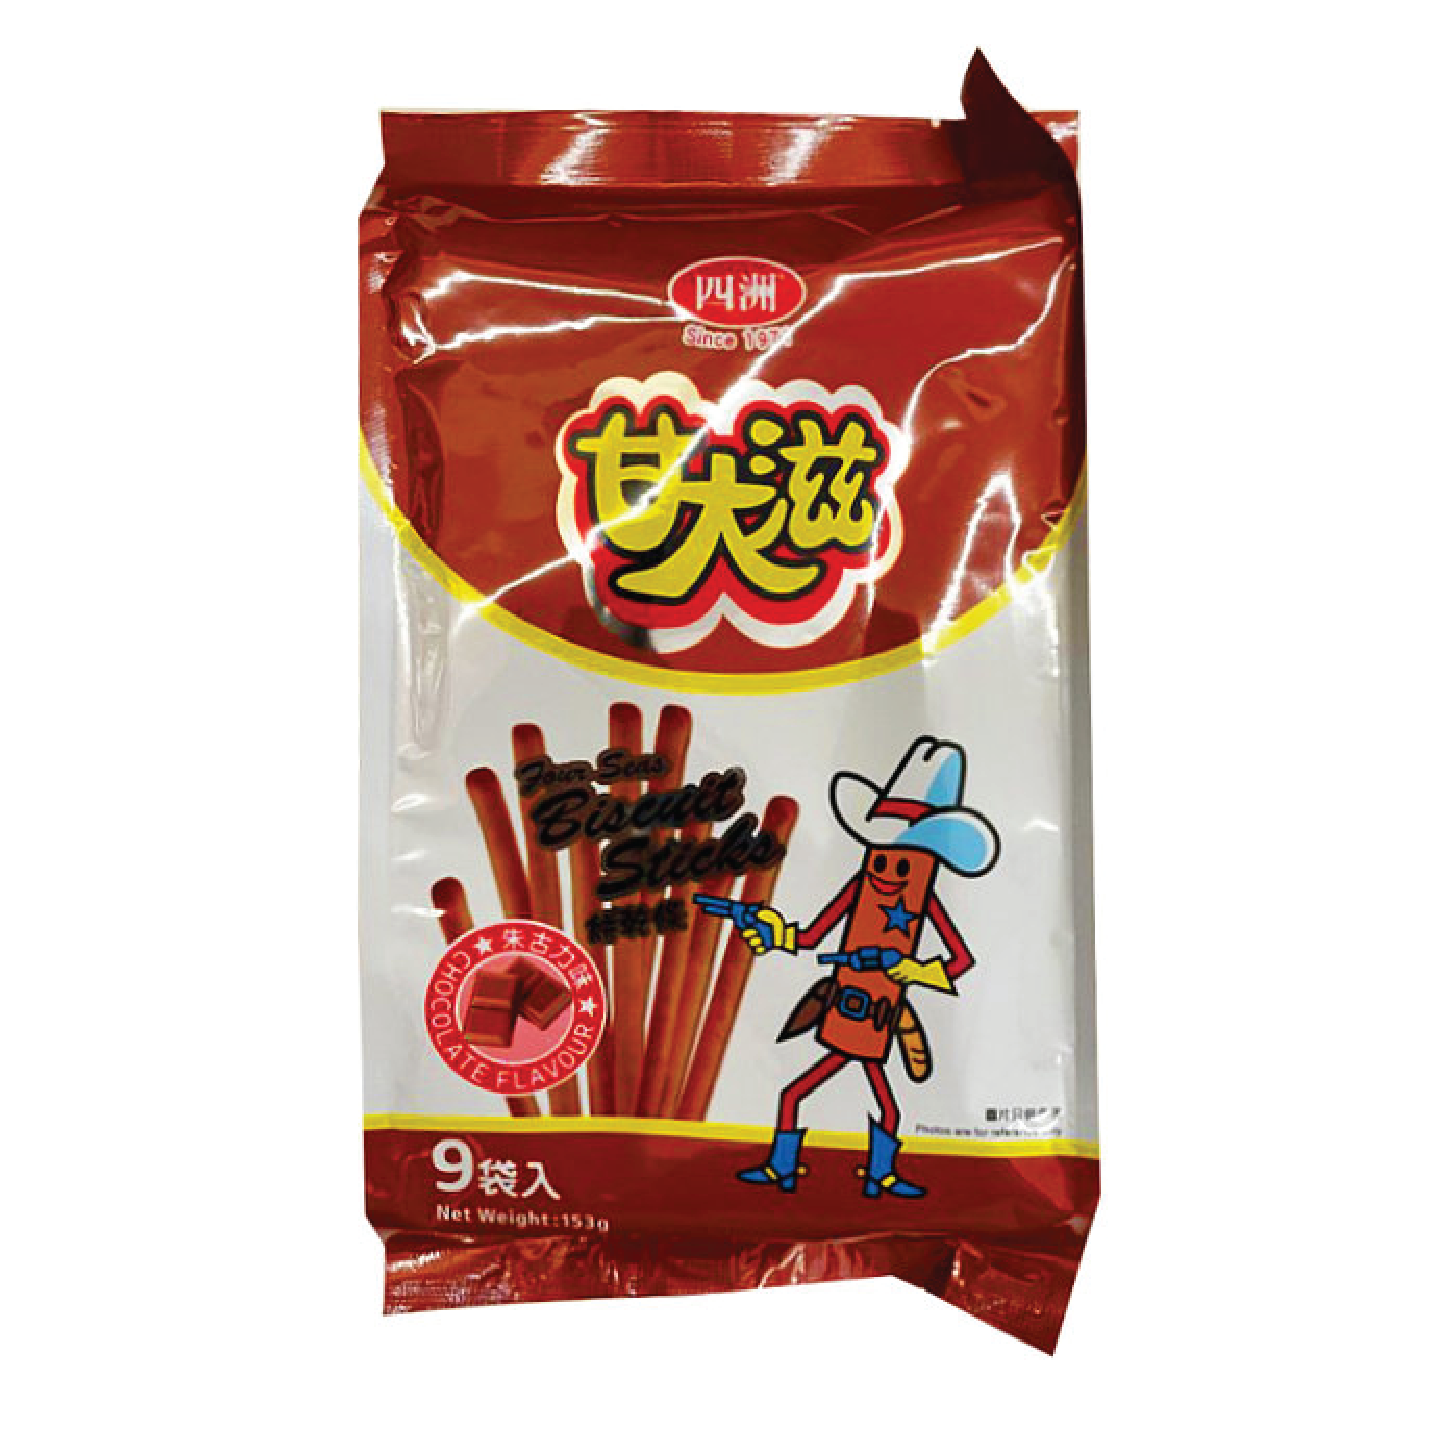 FOUR SEAS BISCUITS CHOCO FLV ( FAMILY PACK ) 四洲 甘大滋朱古力味 (家庭裝)